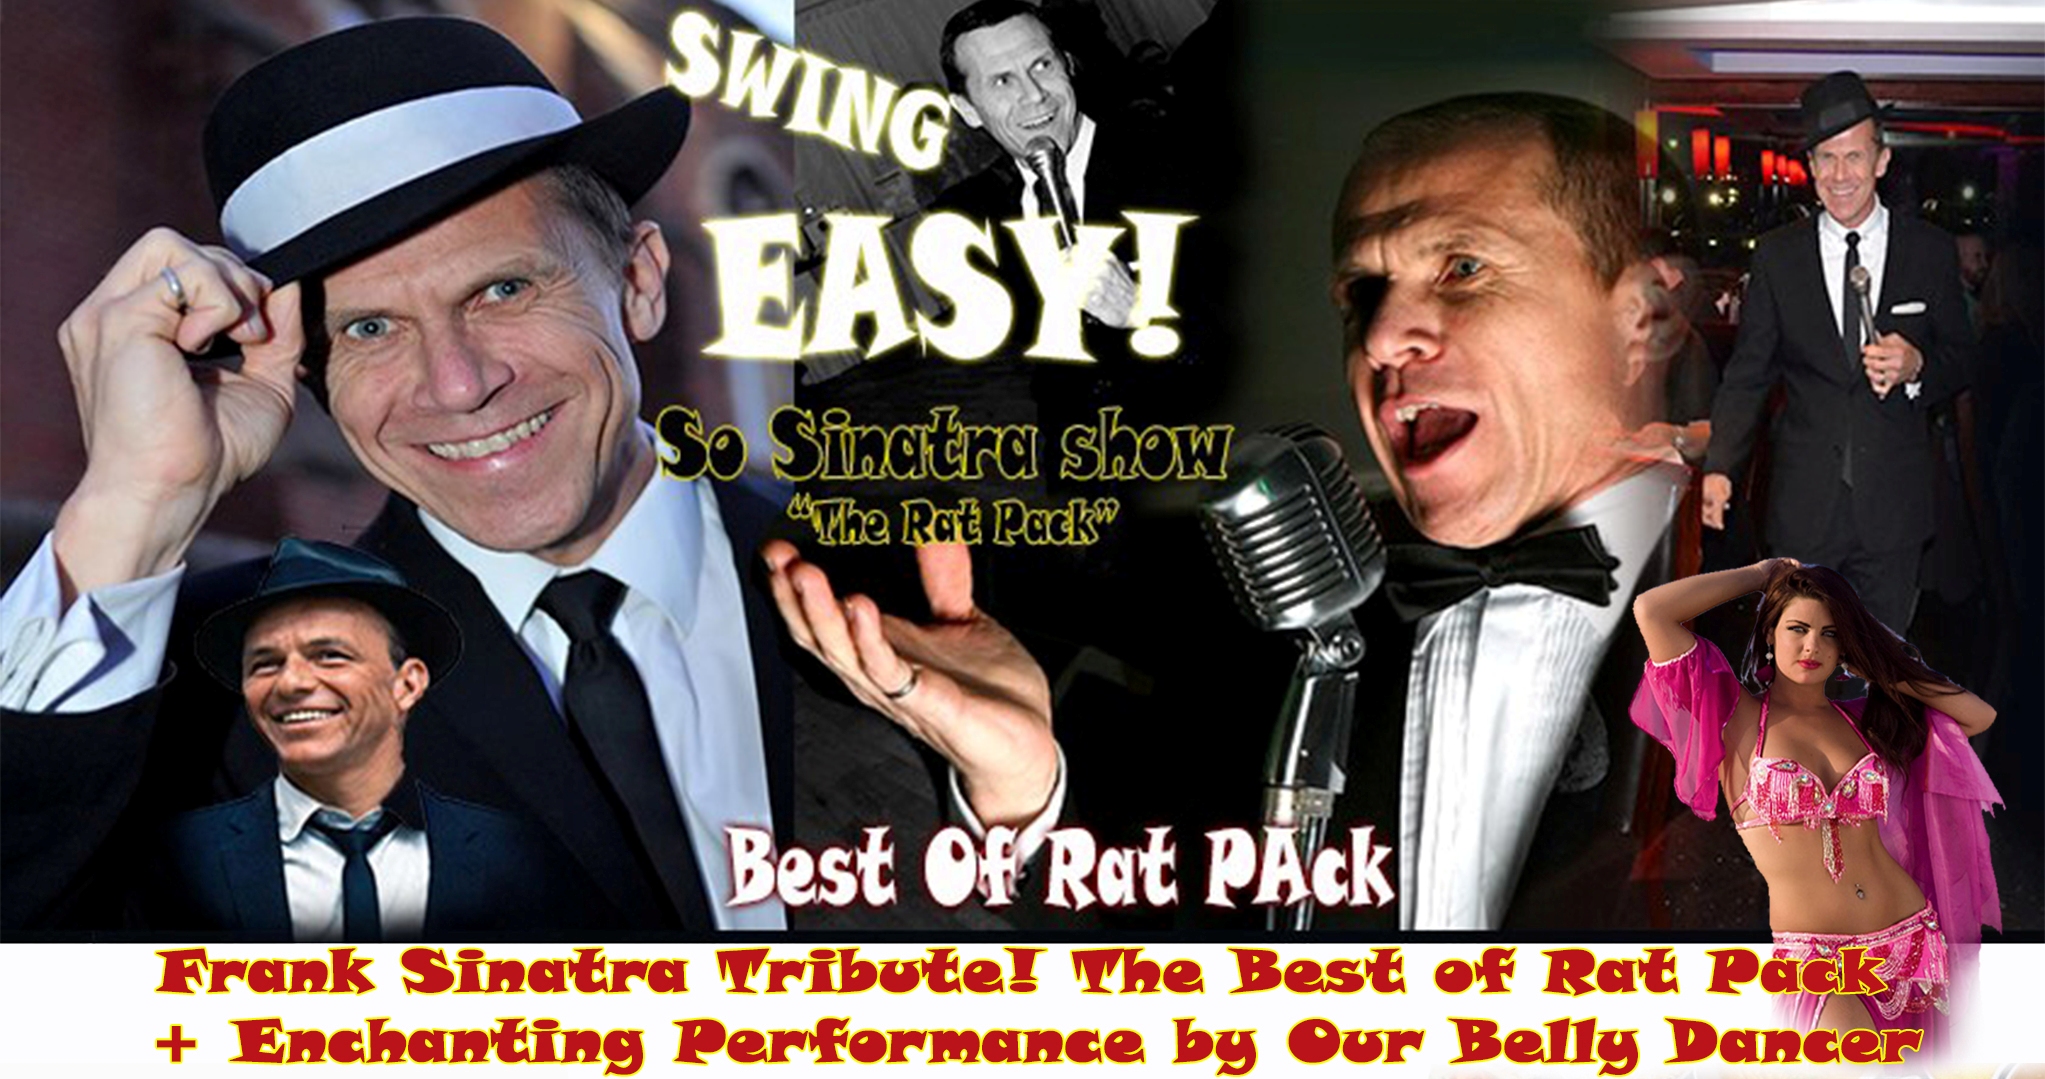 Frank Sinatra Tribute & The Best of Rat Pack